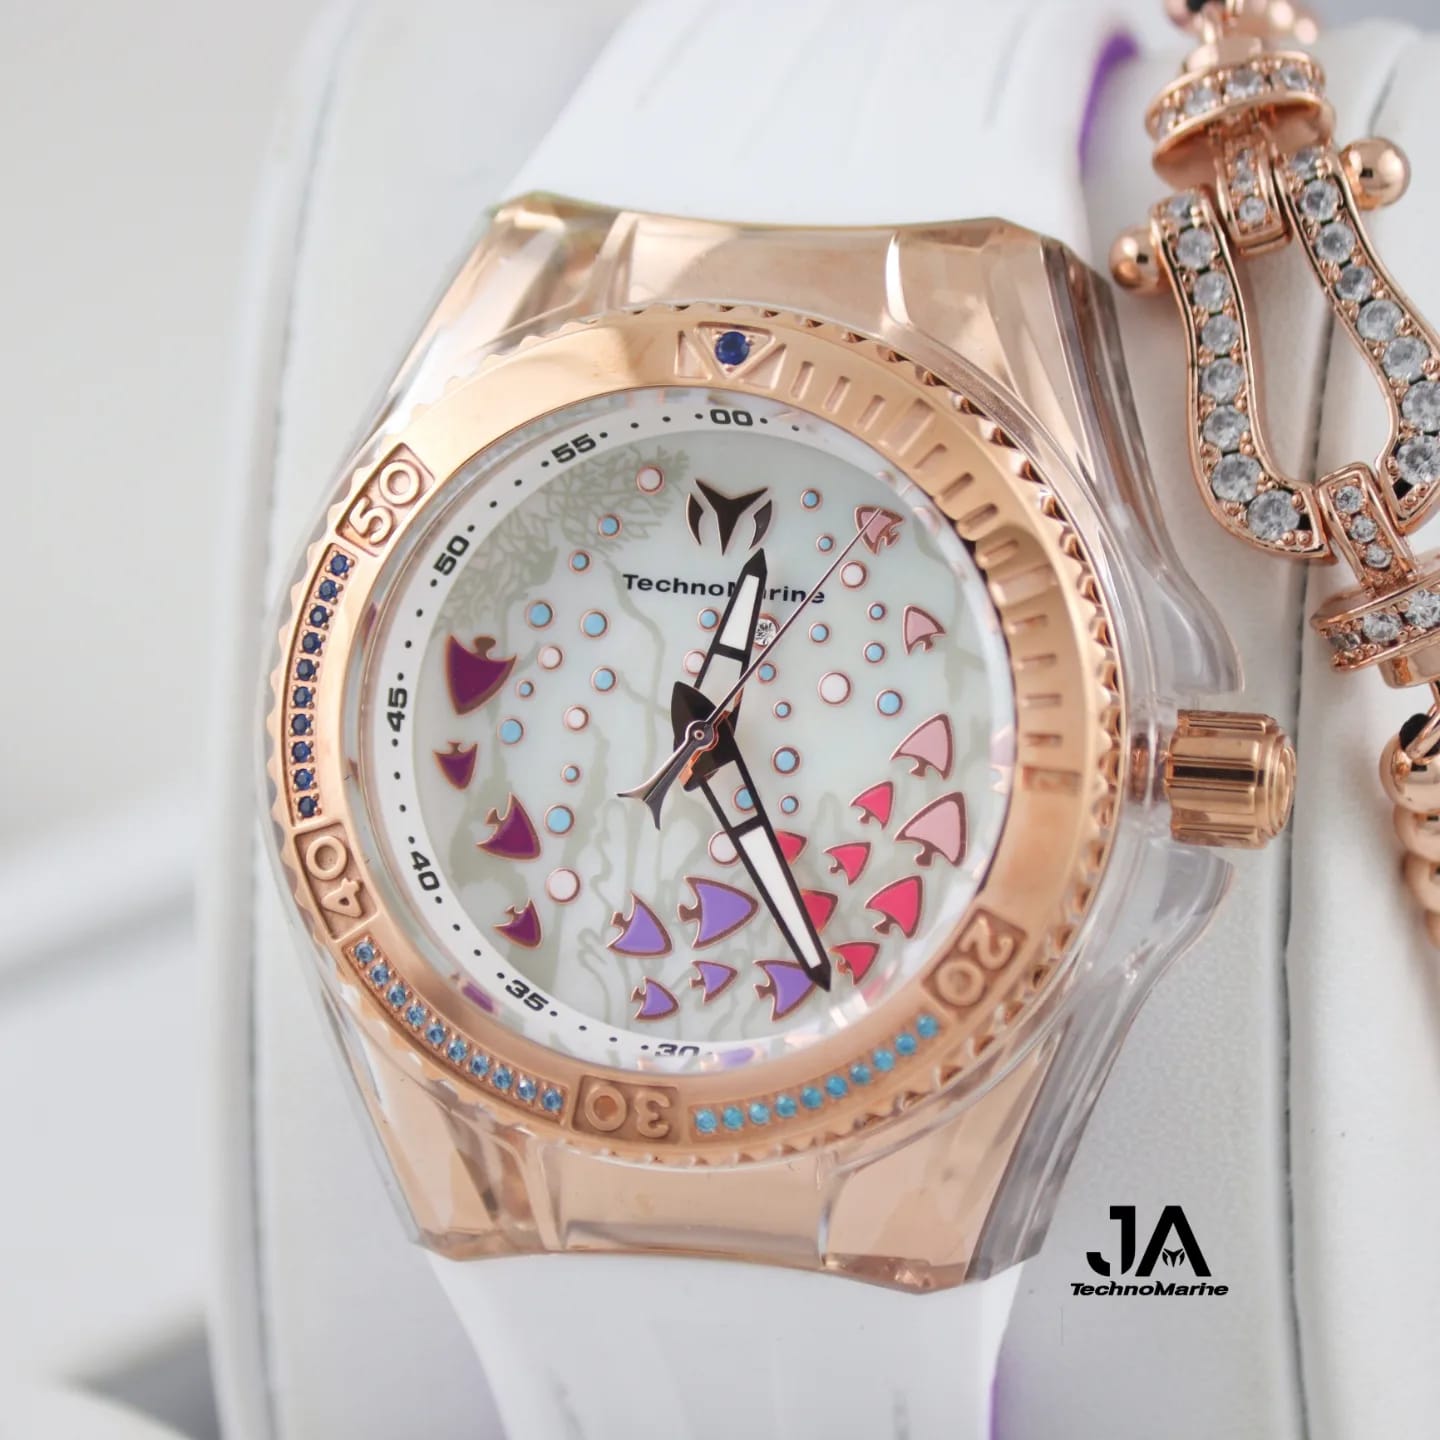 𝐓𝐄𝐂𝐇𝐍𝐎𝐌𝐀𝐑𝐈𝐍𝐄 Dreams Cruise Collection 40mm